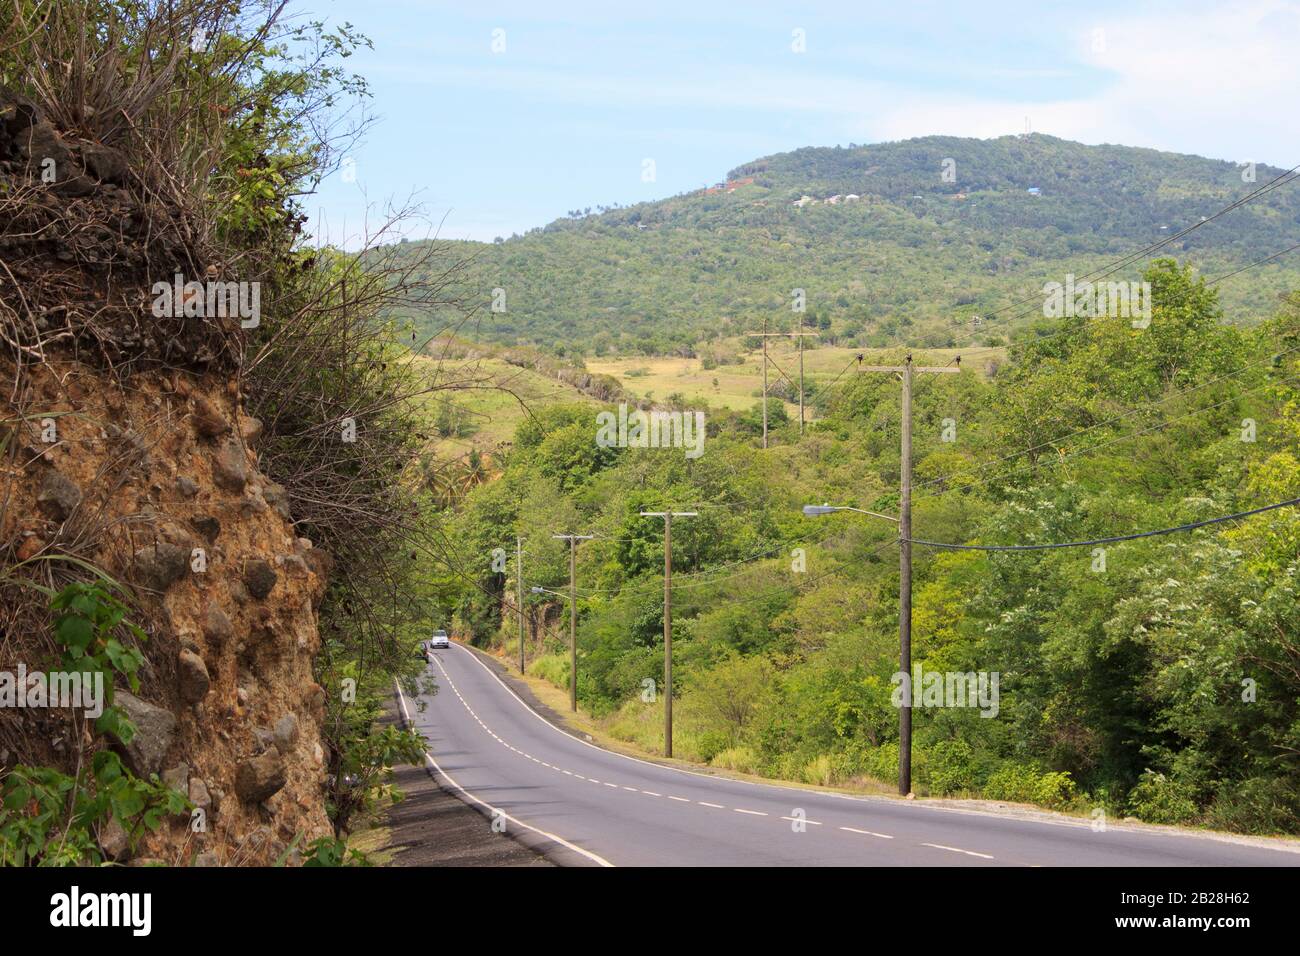 Surreal, Canelles, asphalt road with white markings on the way to Vieux Fort, on a summer day greenery everywhere trees, rocks an electric pole lines Stock Photo